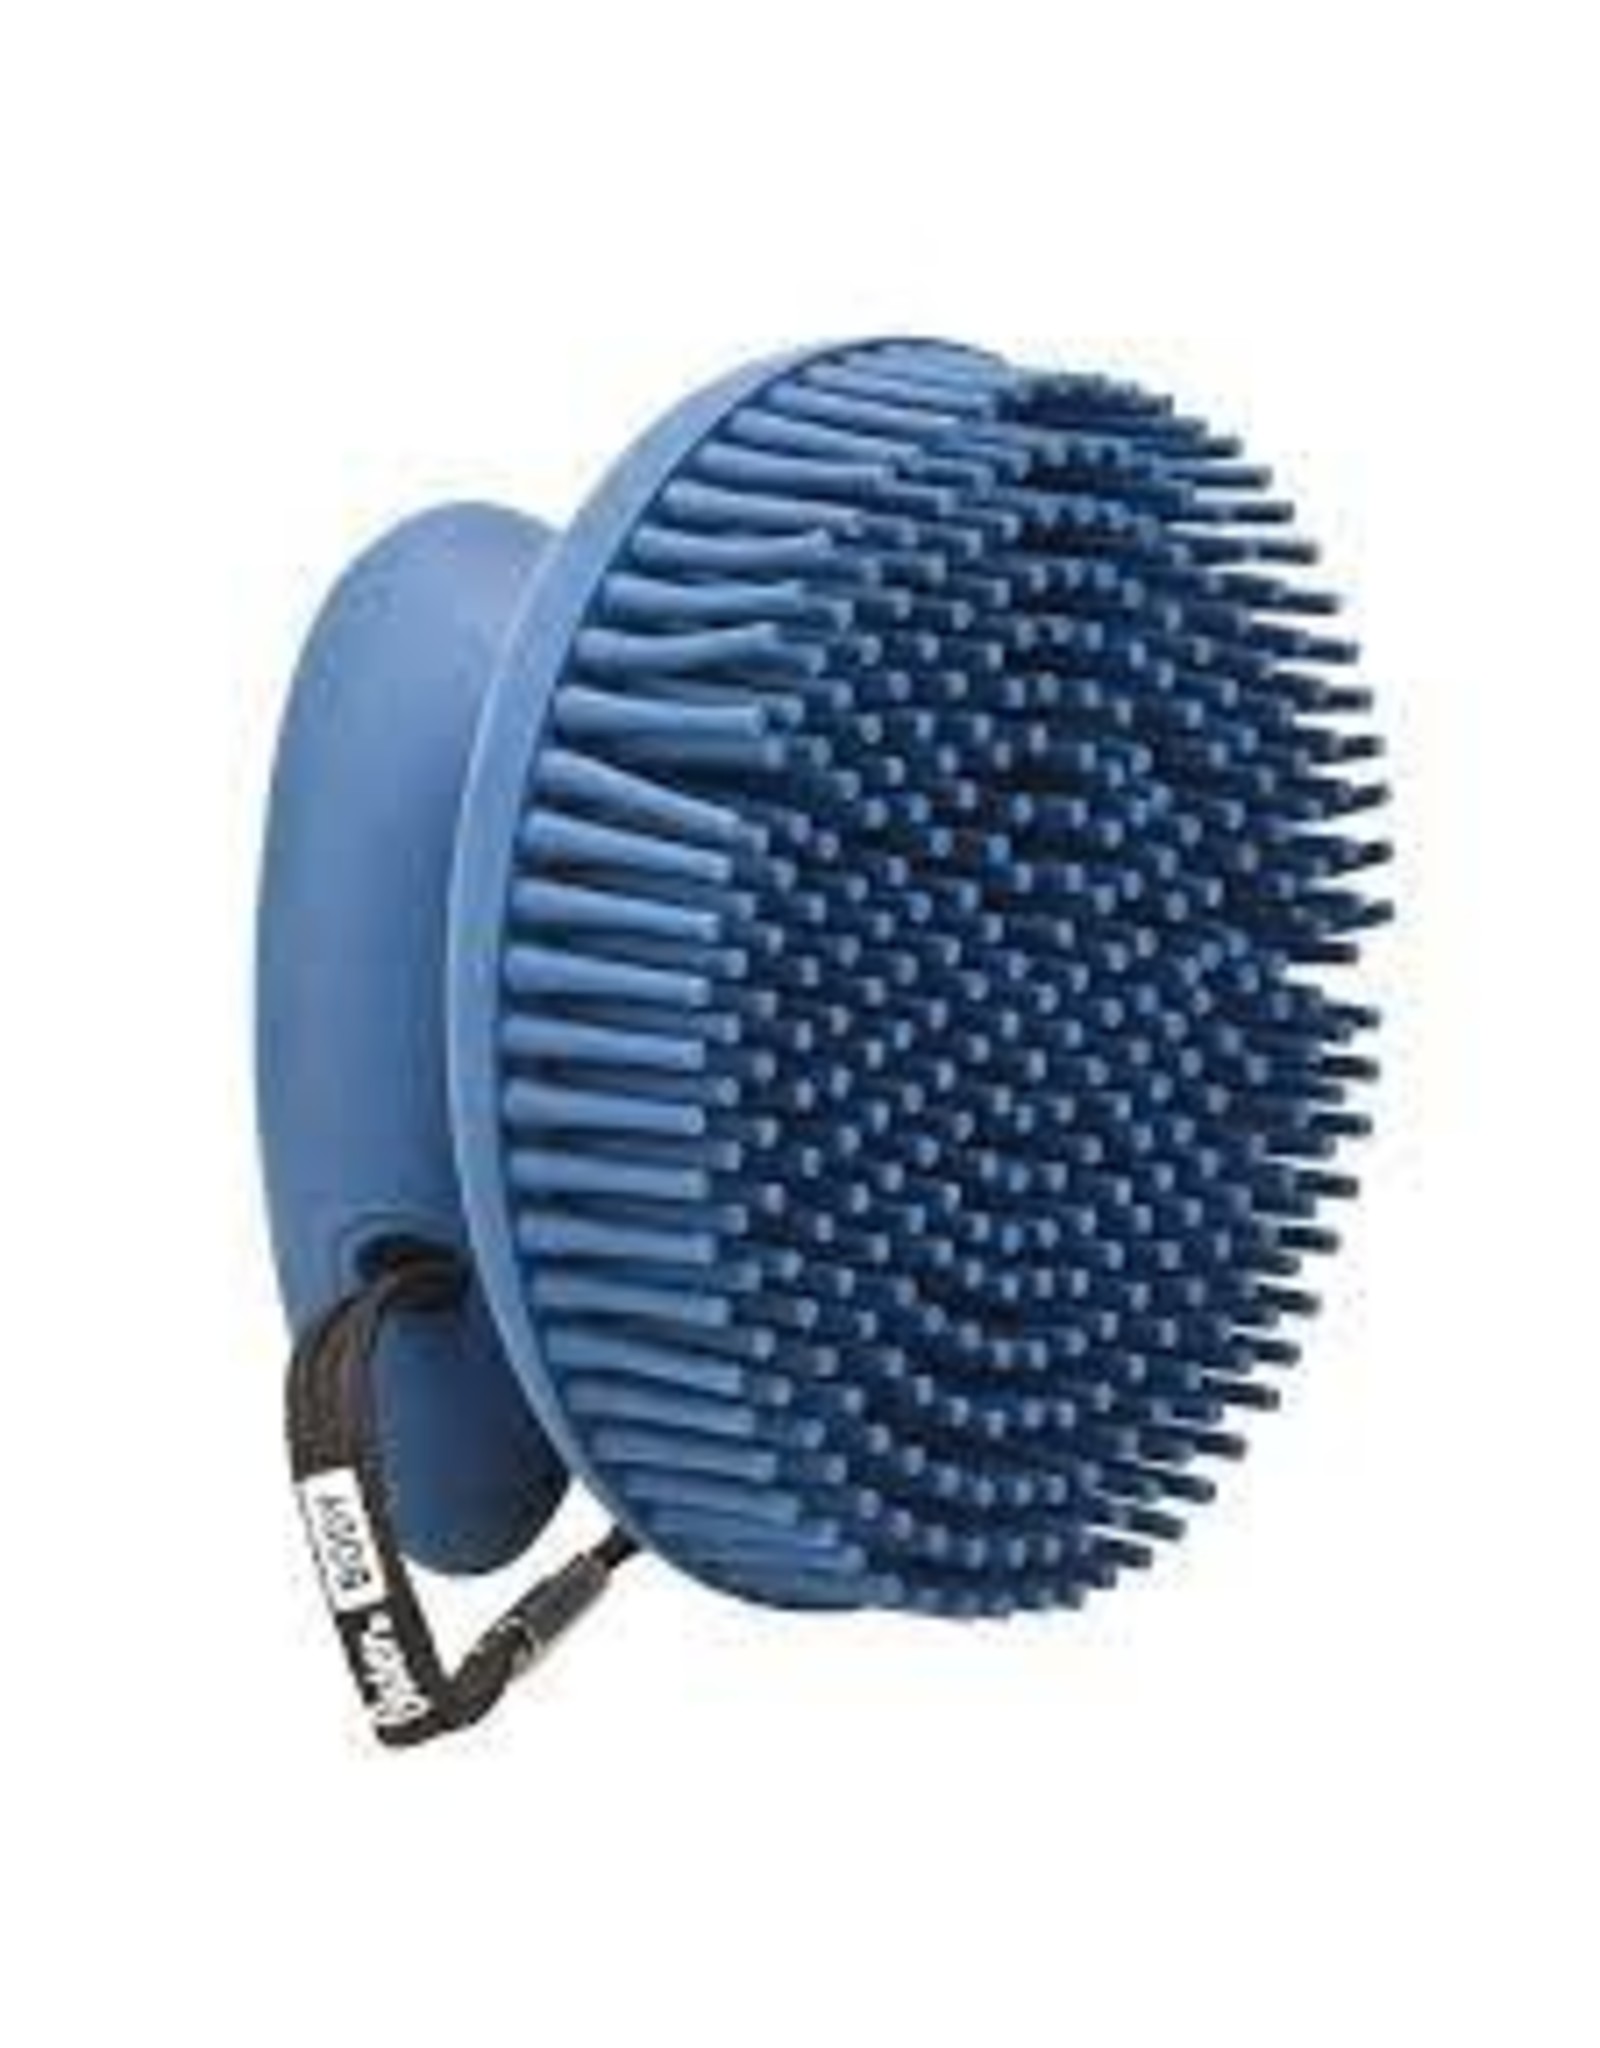 Oster Curry Comb - 374488